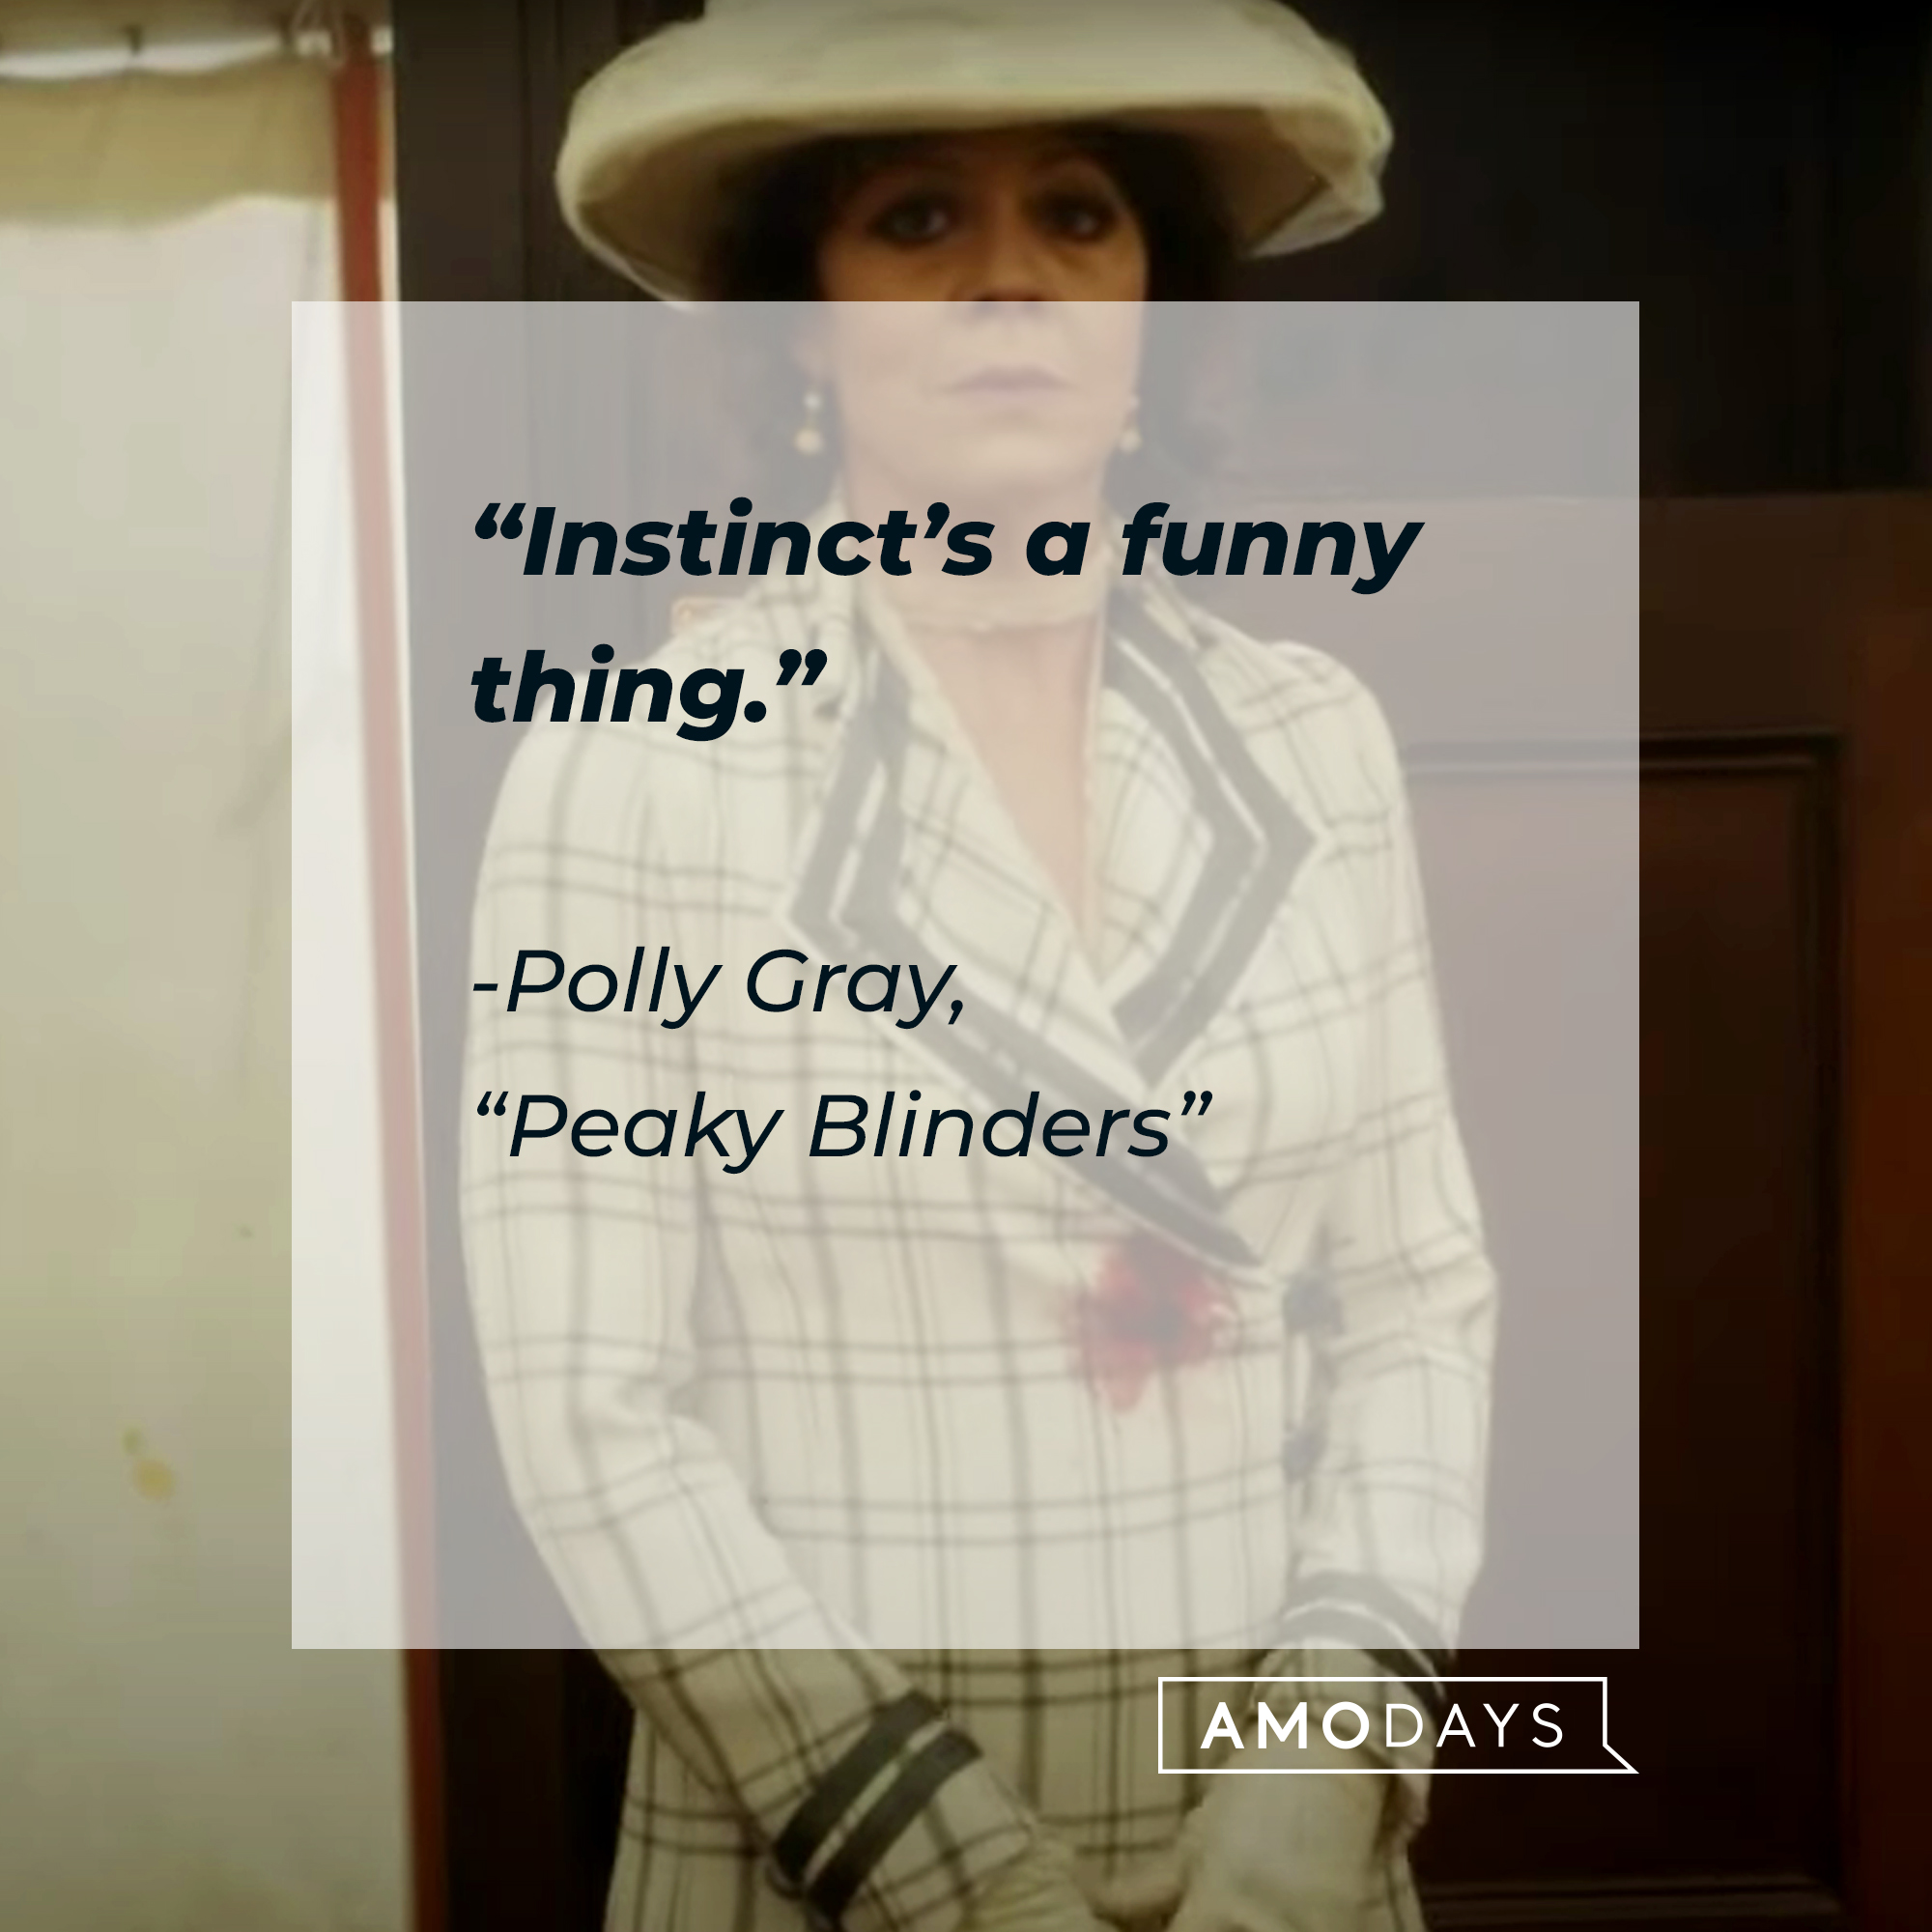 Polly Gray’s quote from “Peaky Blinders”: “Instinct’s a funny thing.” | Source: Youtube.com/BBC